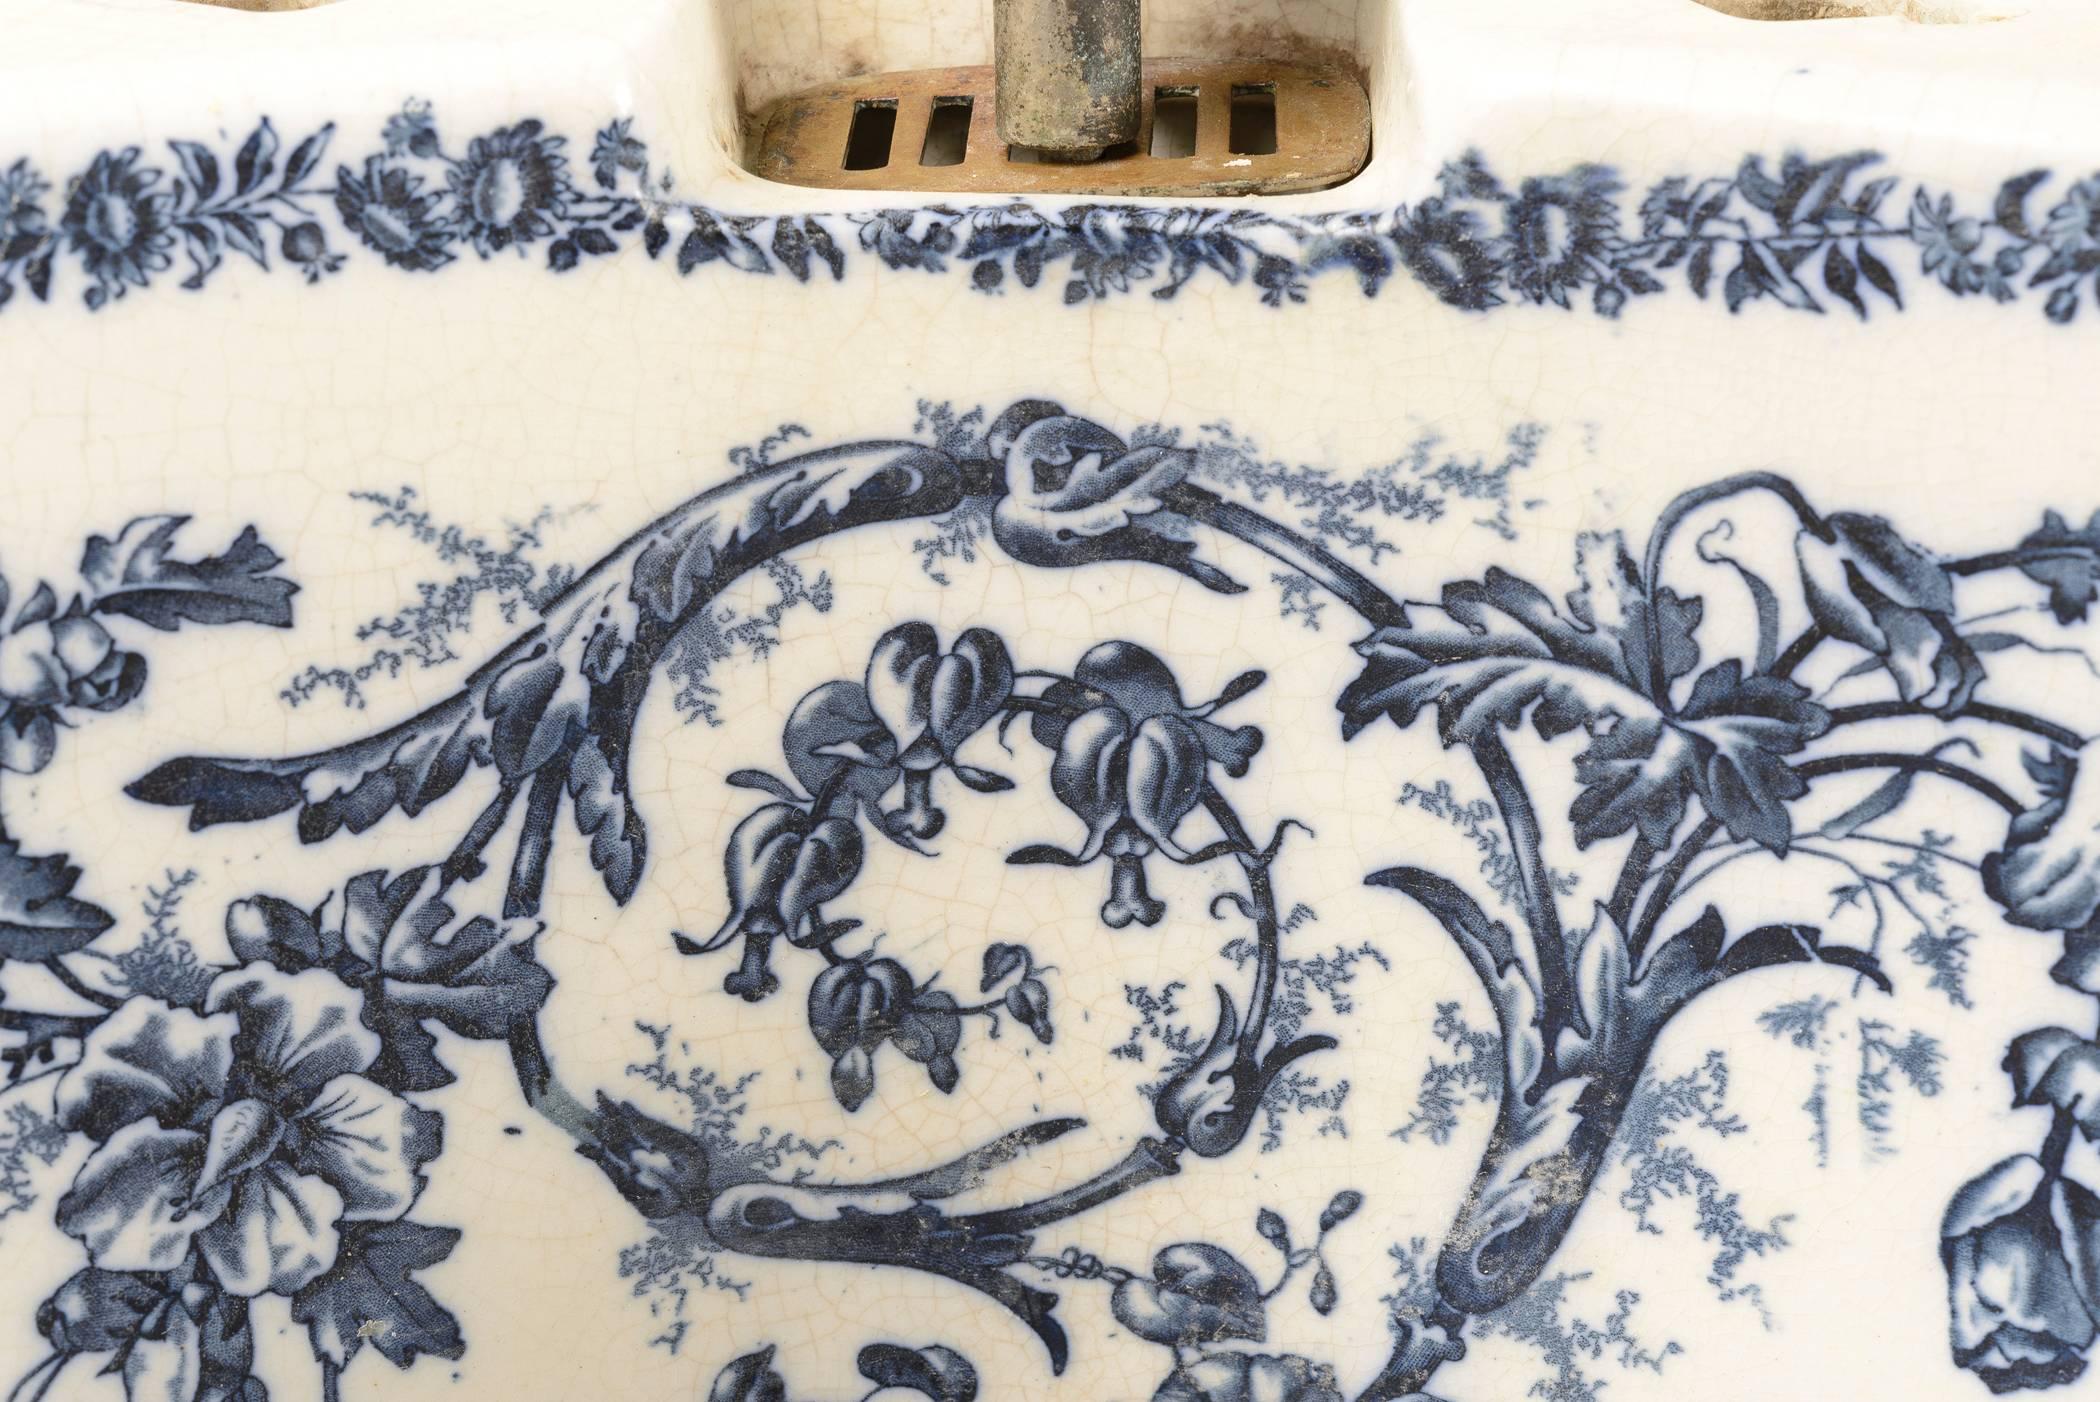 Aesthetic Movement Decorative Sink Basin with Transfer Blue Floral Pattern